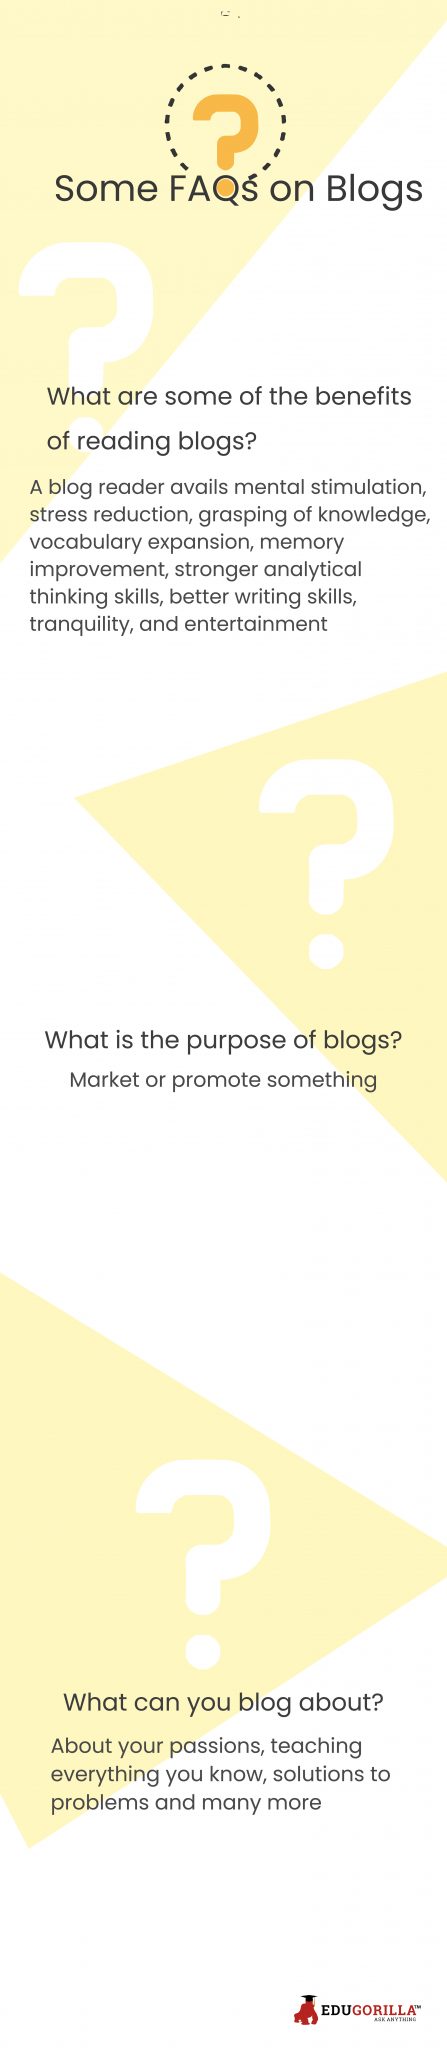 Some FAQs on blogs